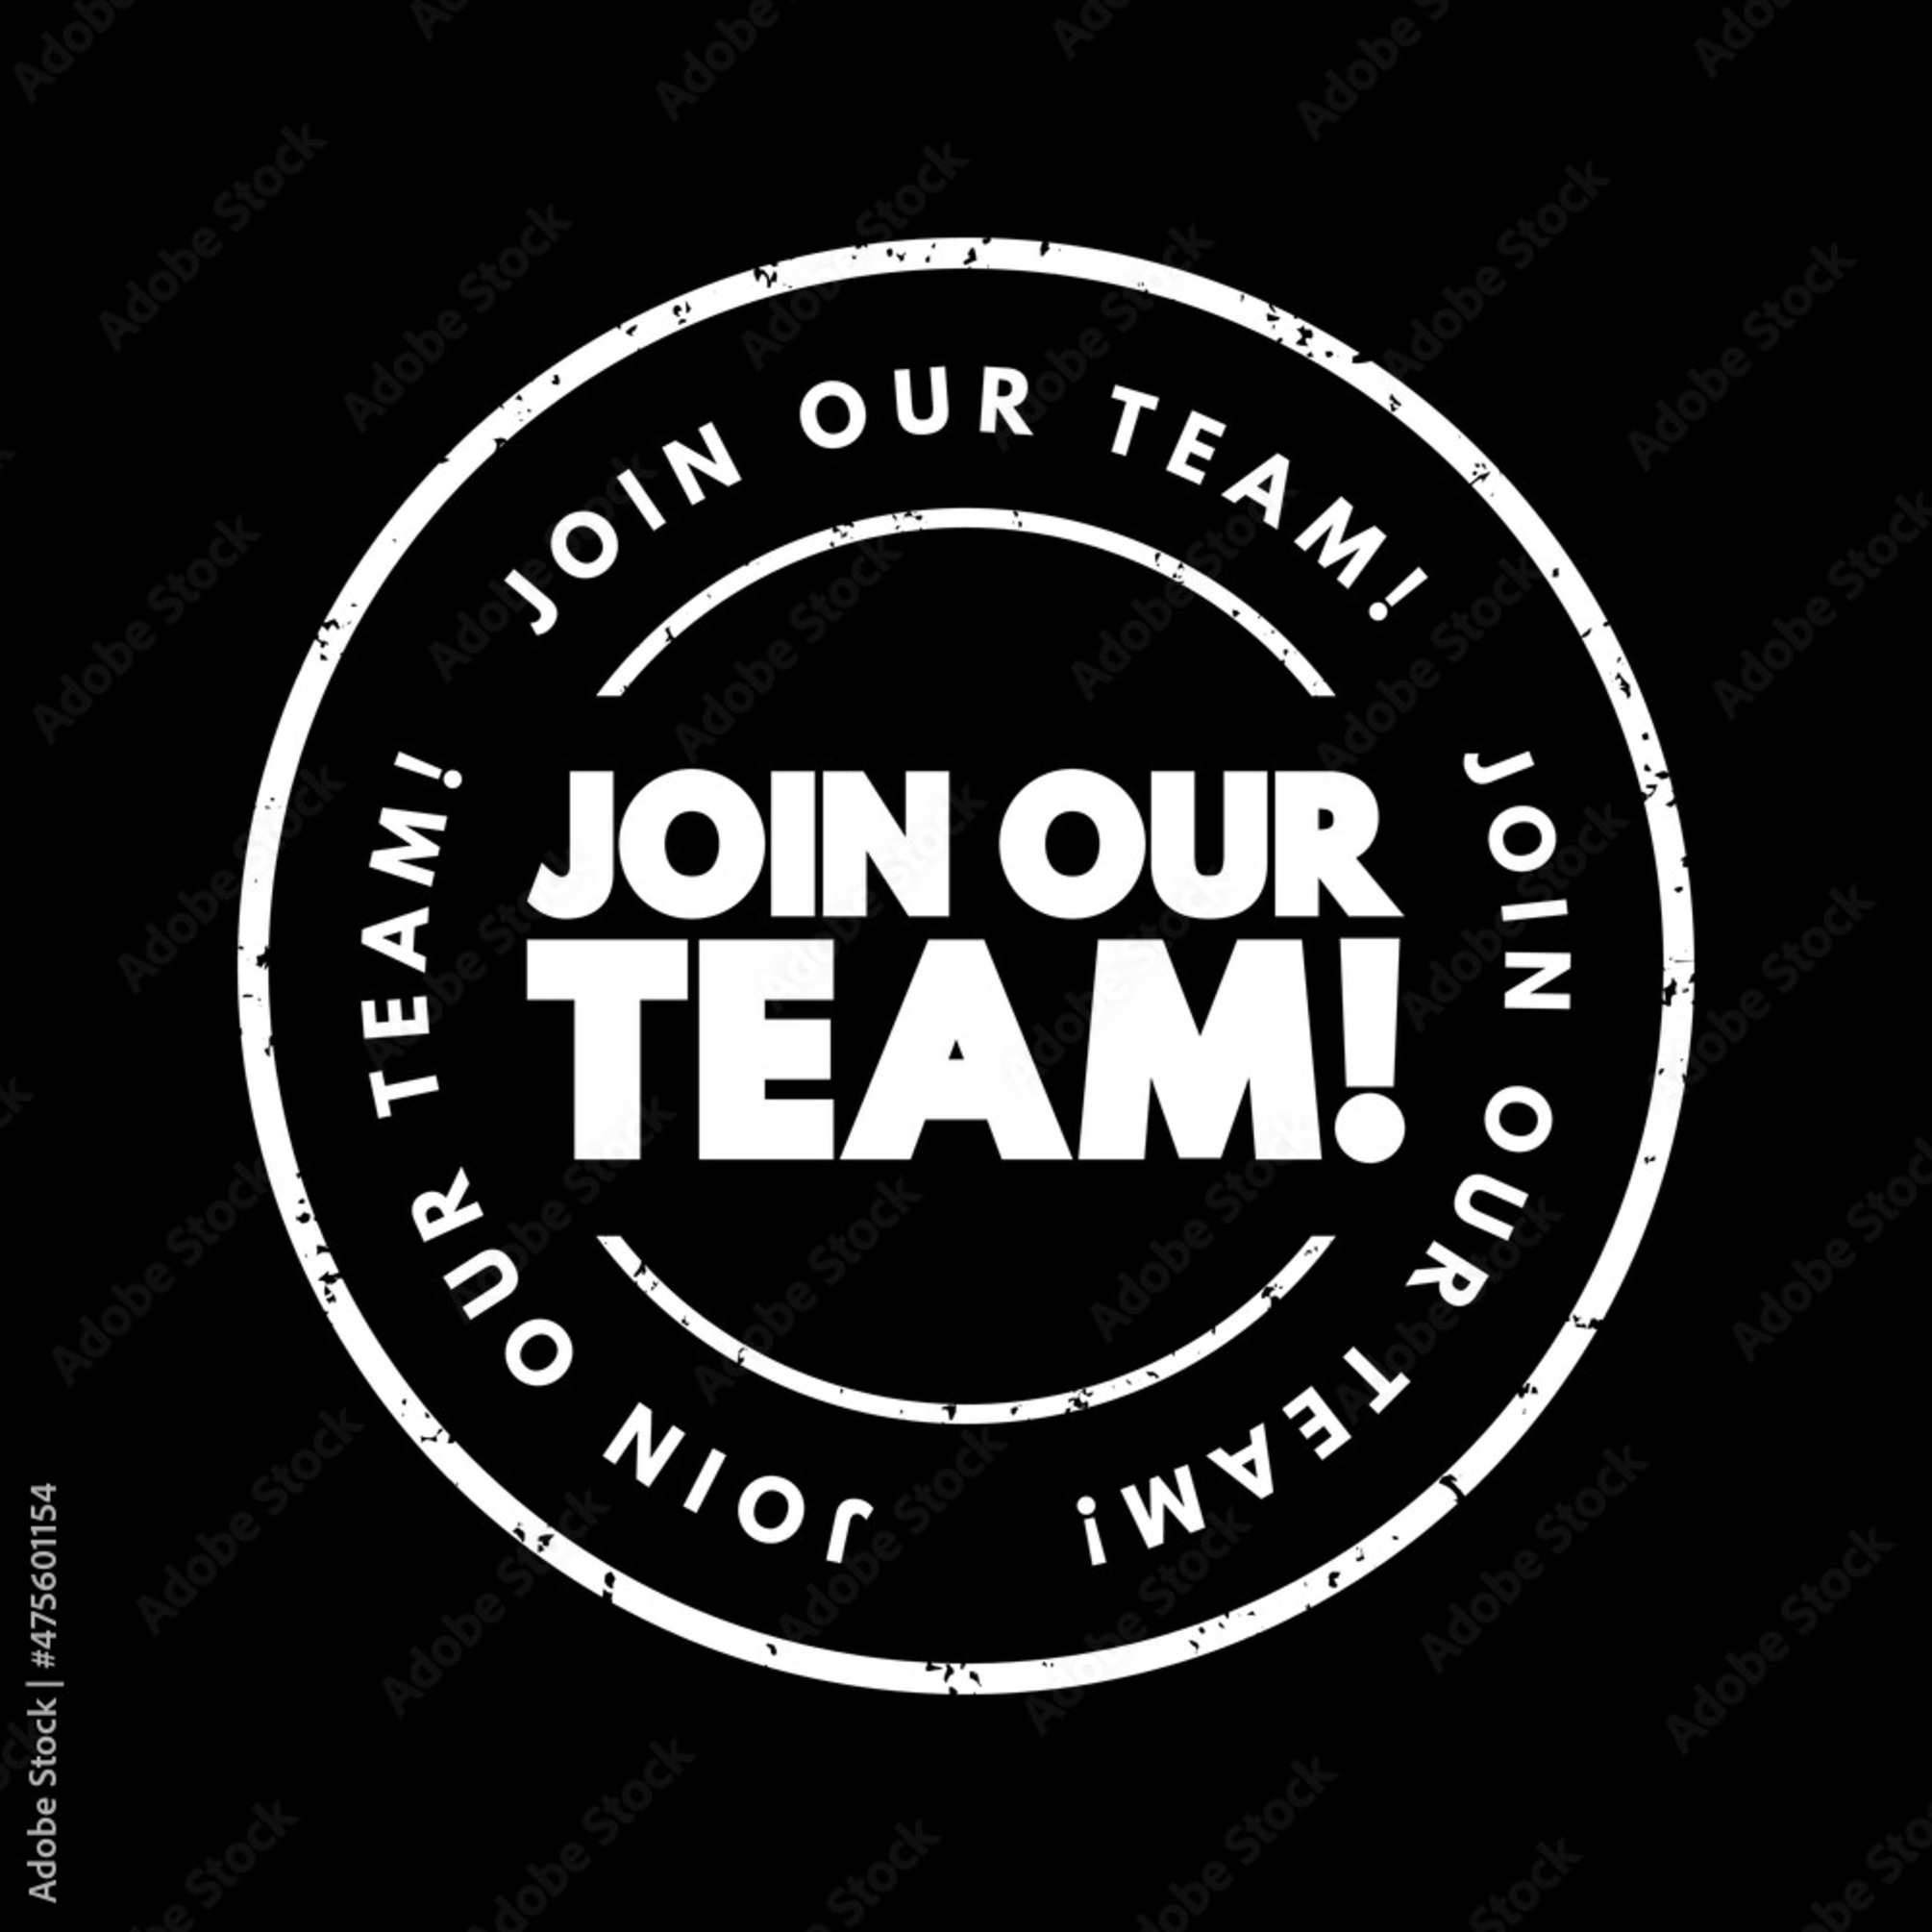 Join our team badge